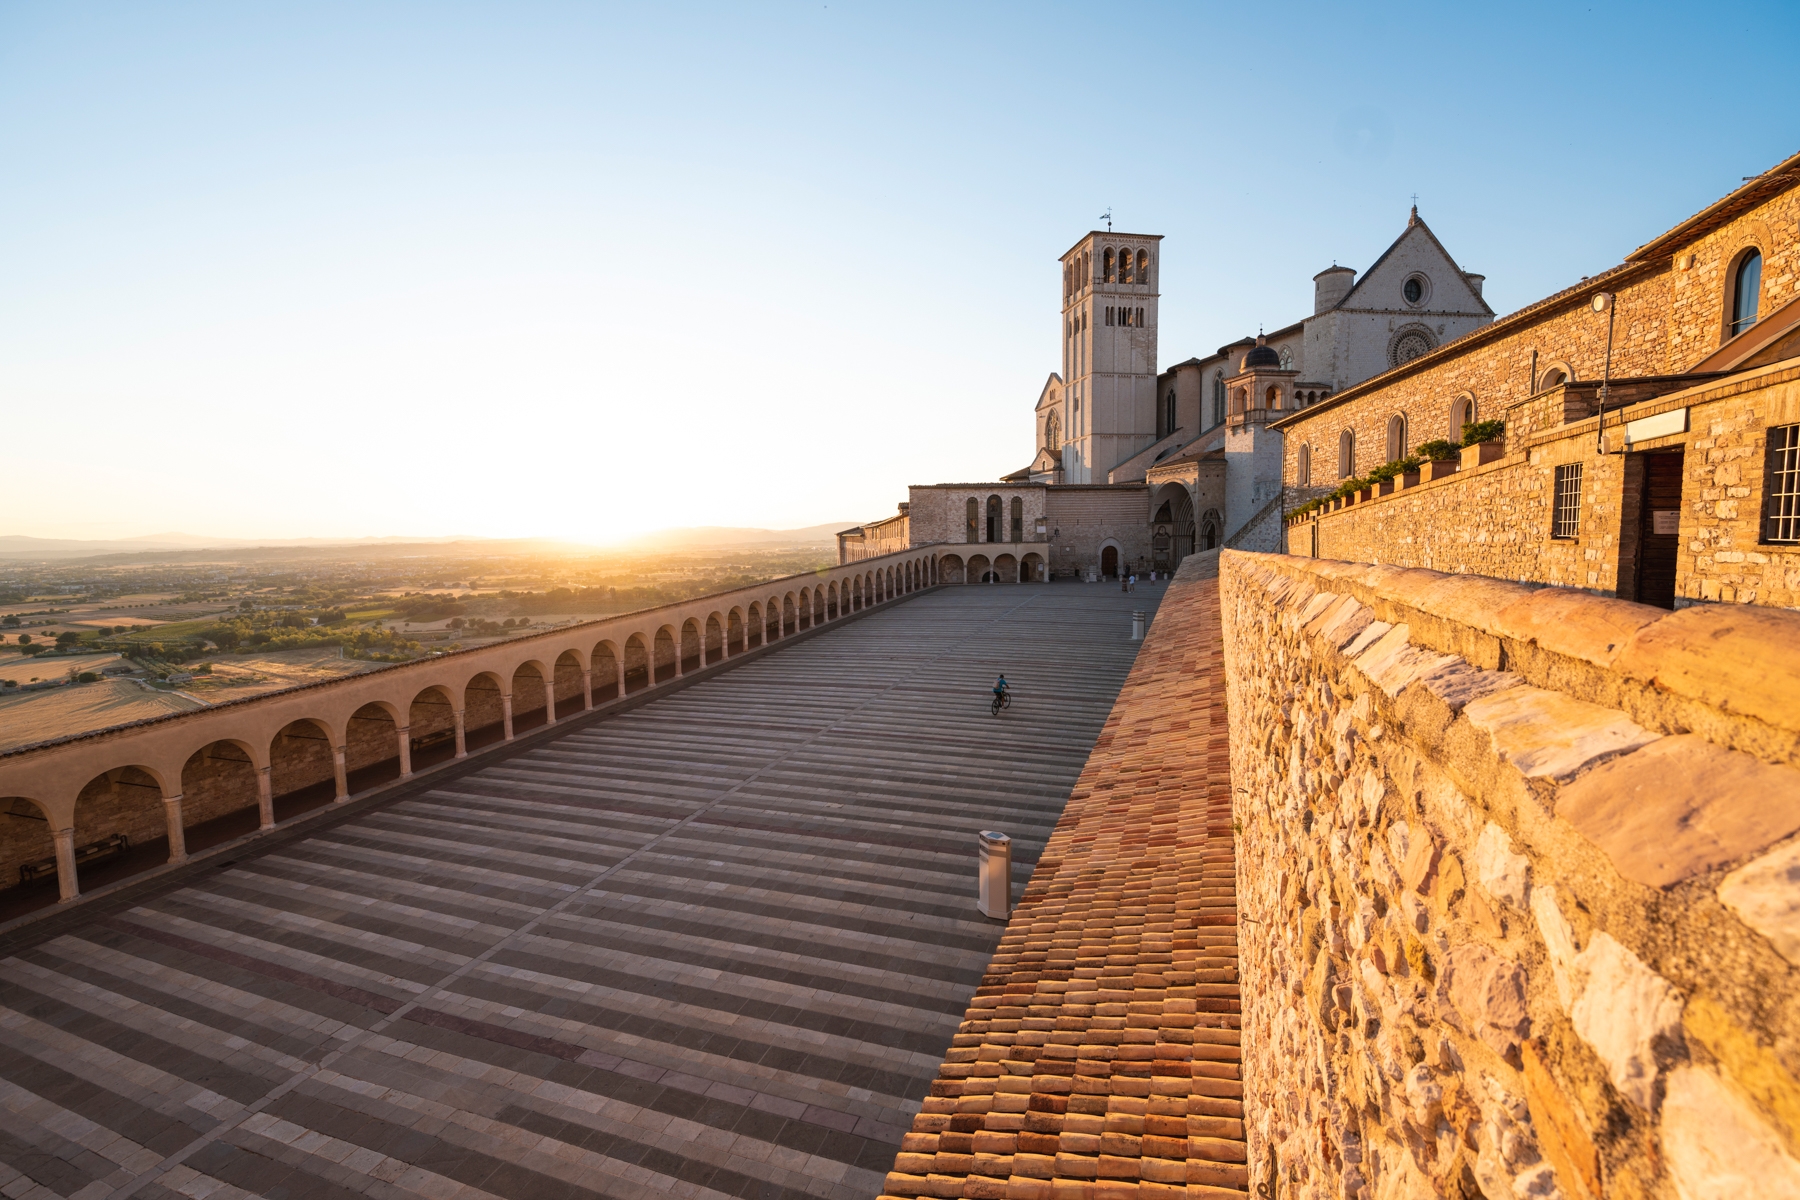  Bask in sun rays at the historic town of Assisi on a spring morning